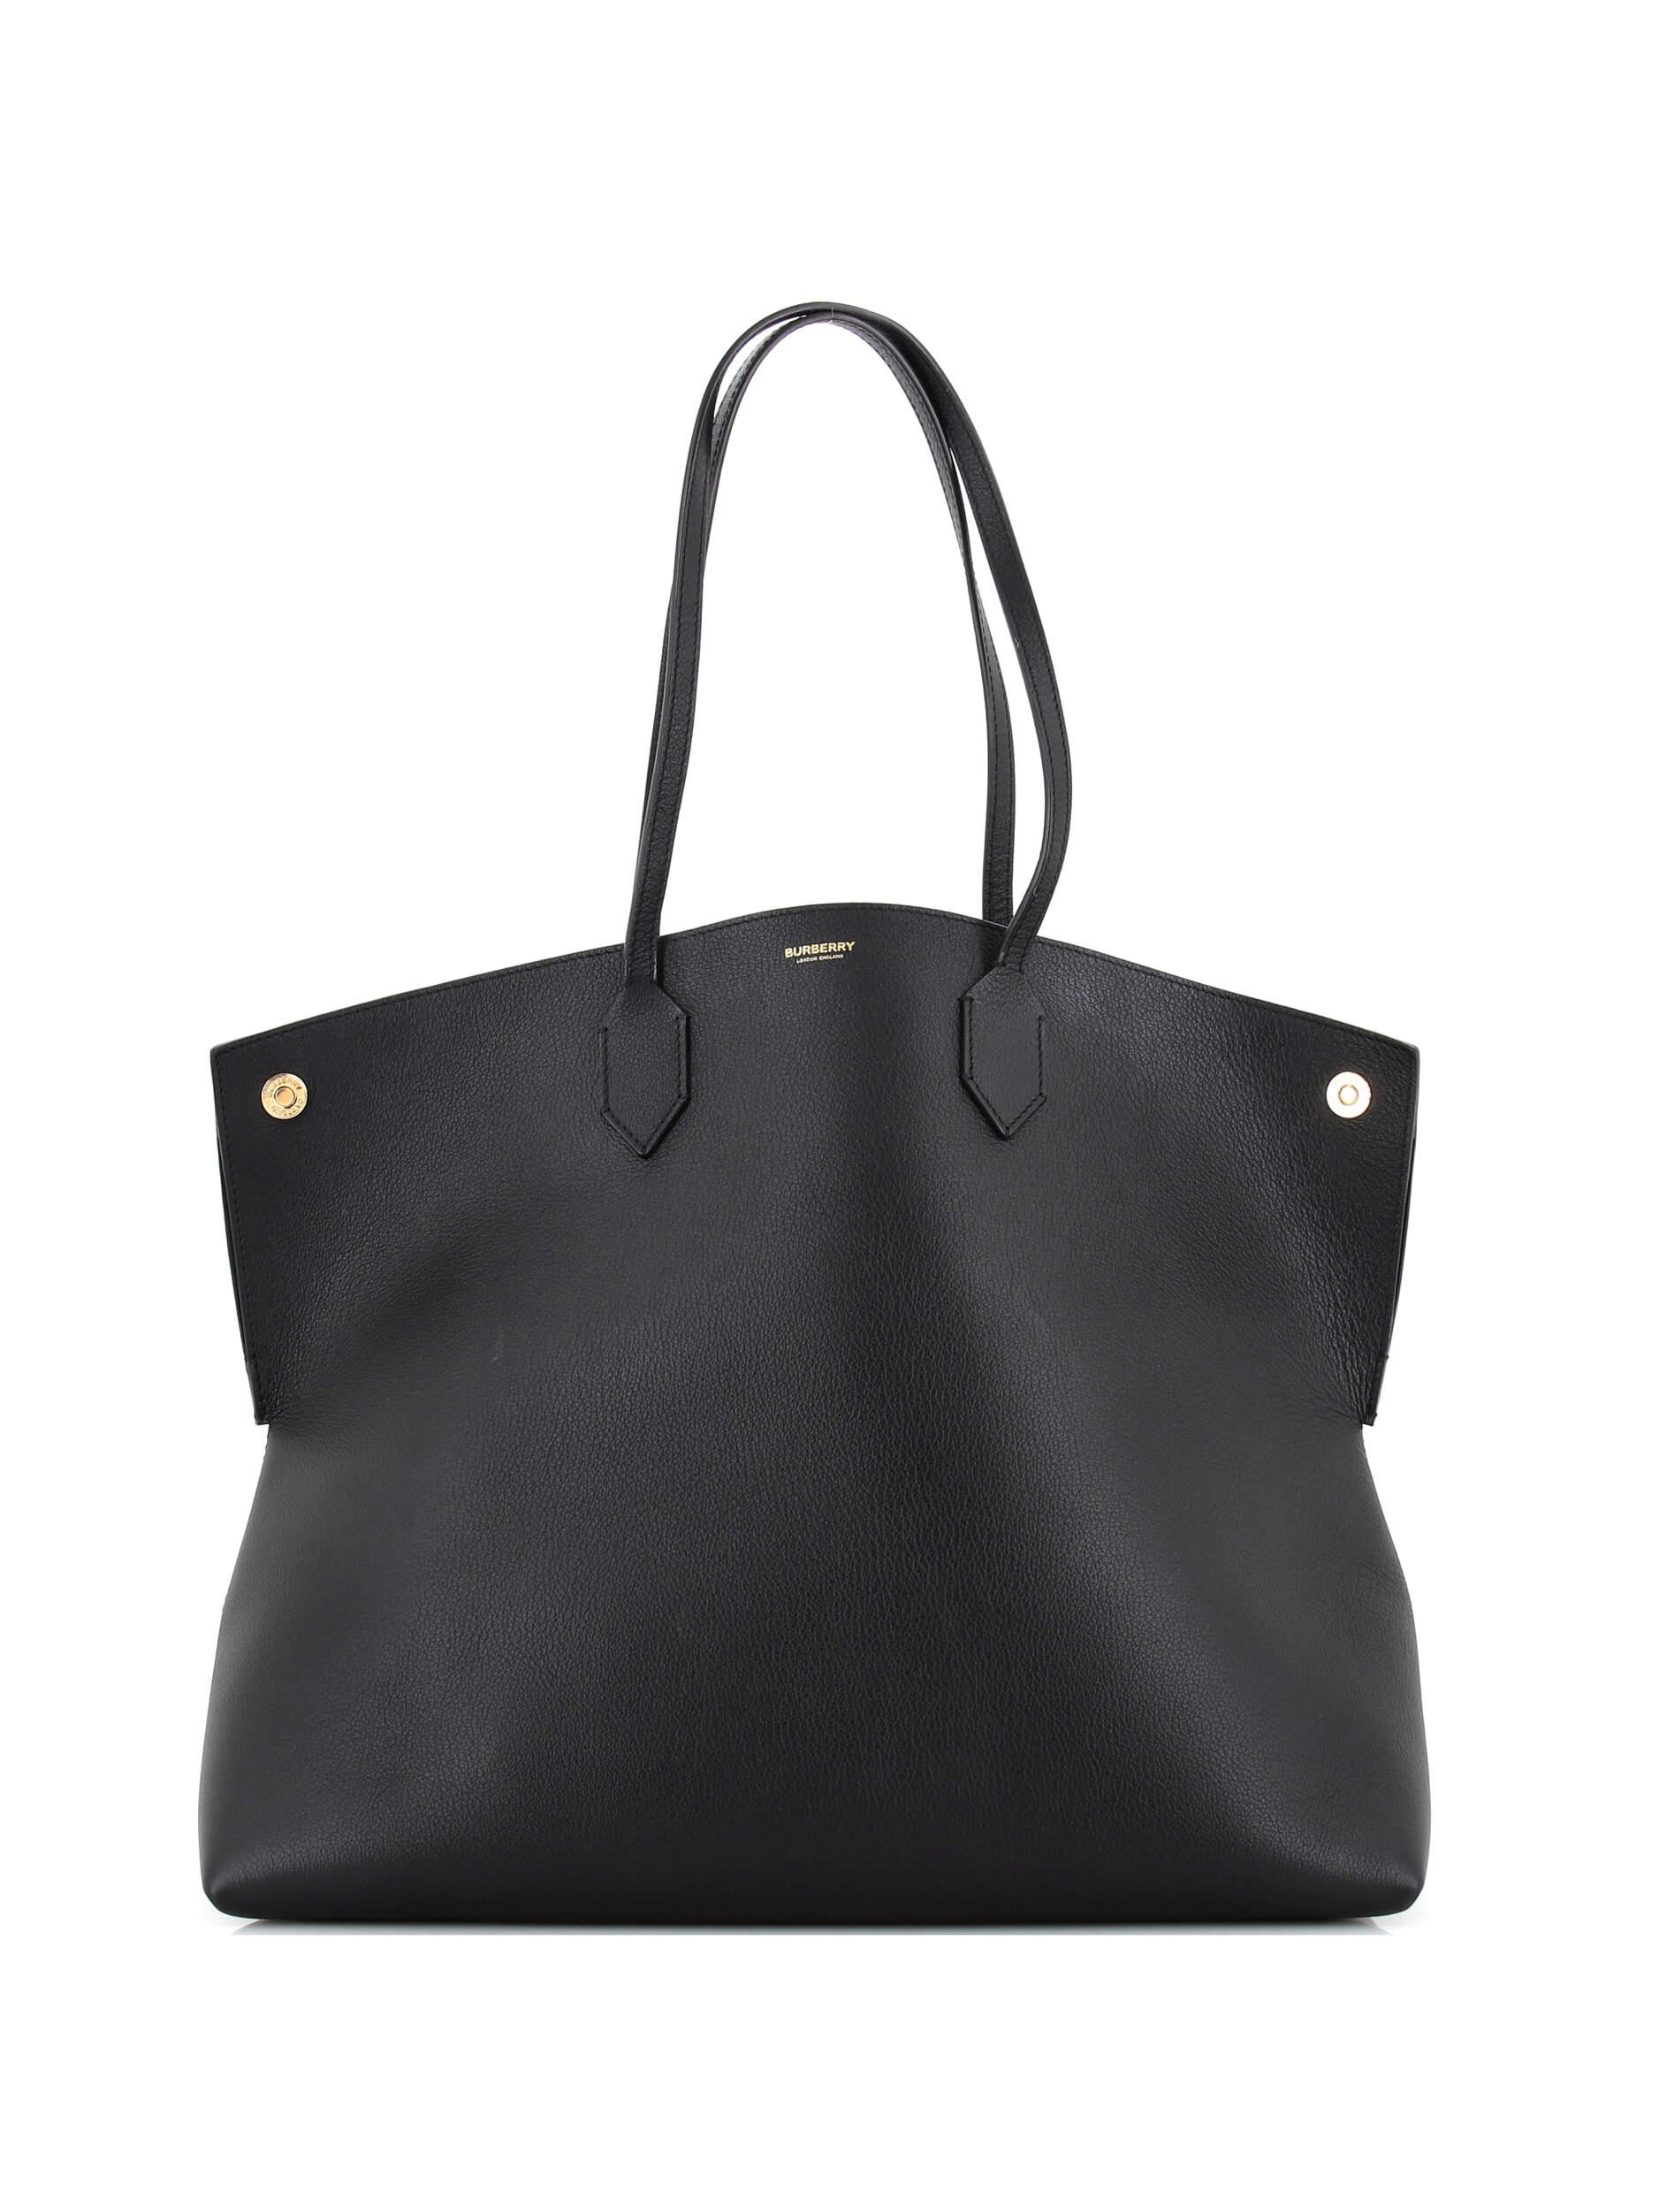 Burberry 100% Leather Black Society Tote Leather Large One Size - 50% ...